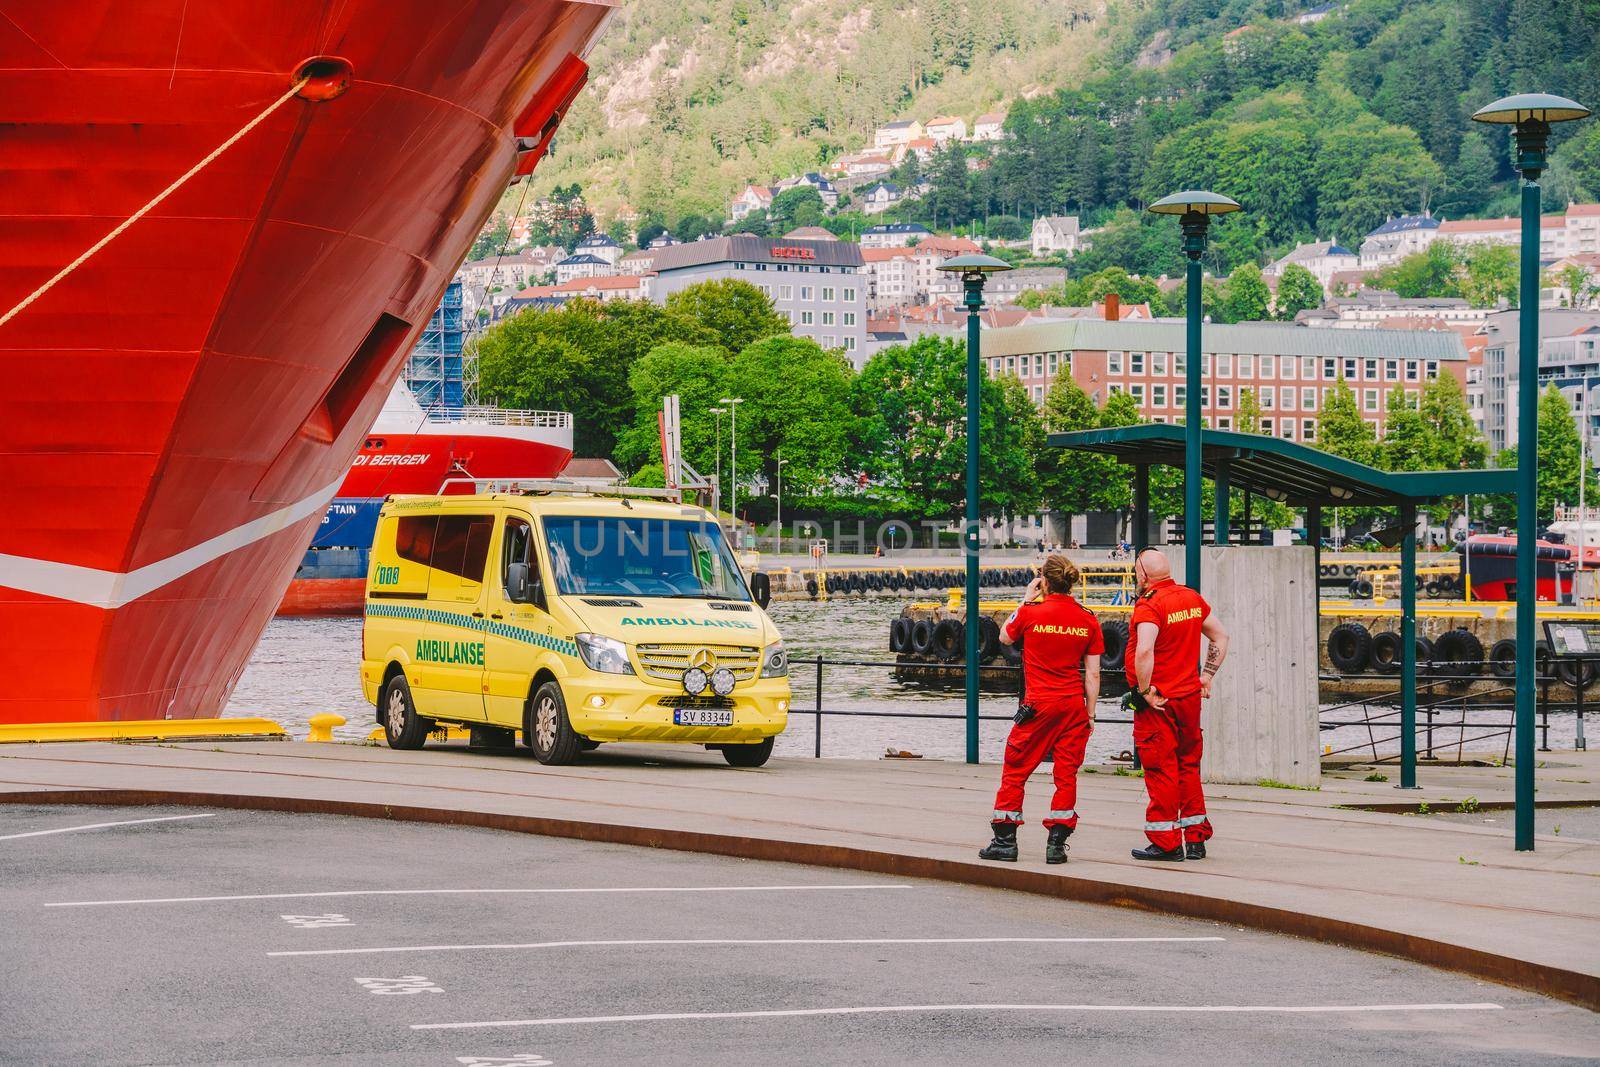 Two Norwegian paramedics in red uniforms are resting near an ambulance parked in a port near a large ship. Theme healthcare and medicine in Norway, Bergen July 28, 2019 by Tomashevska